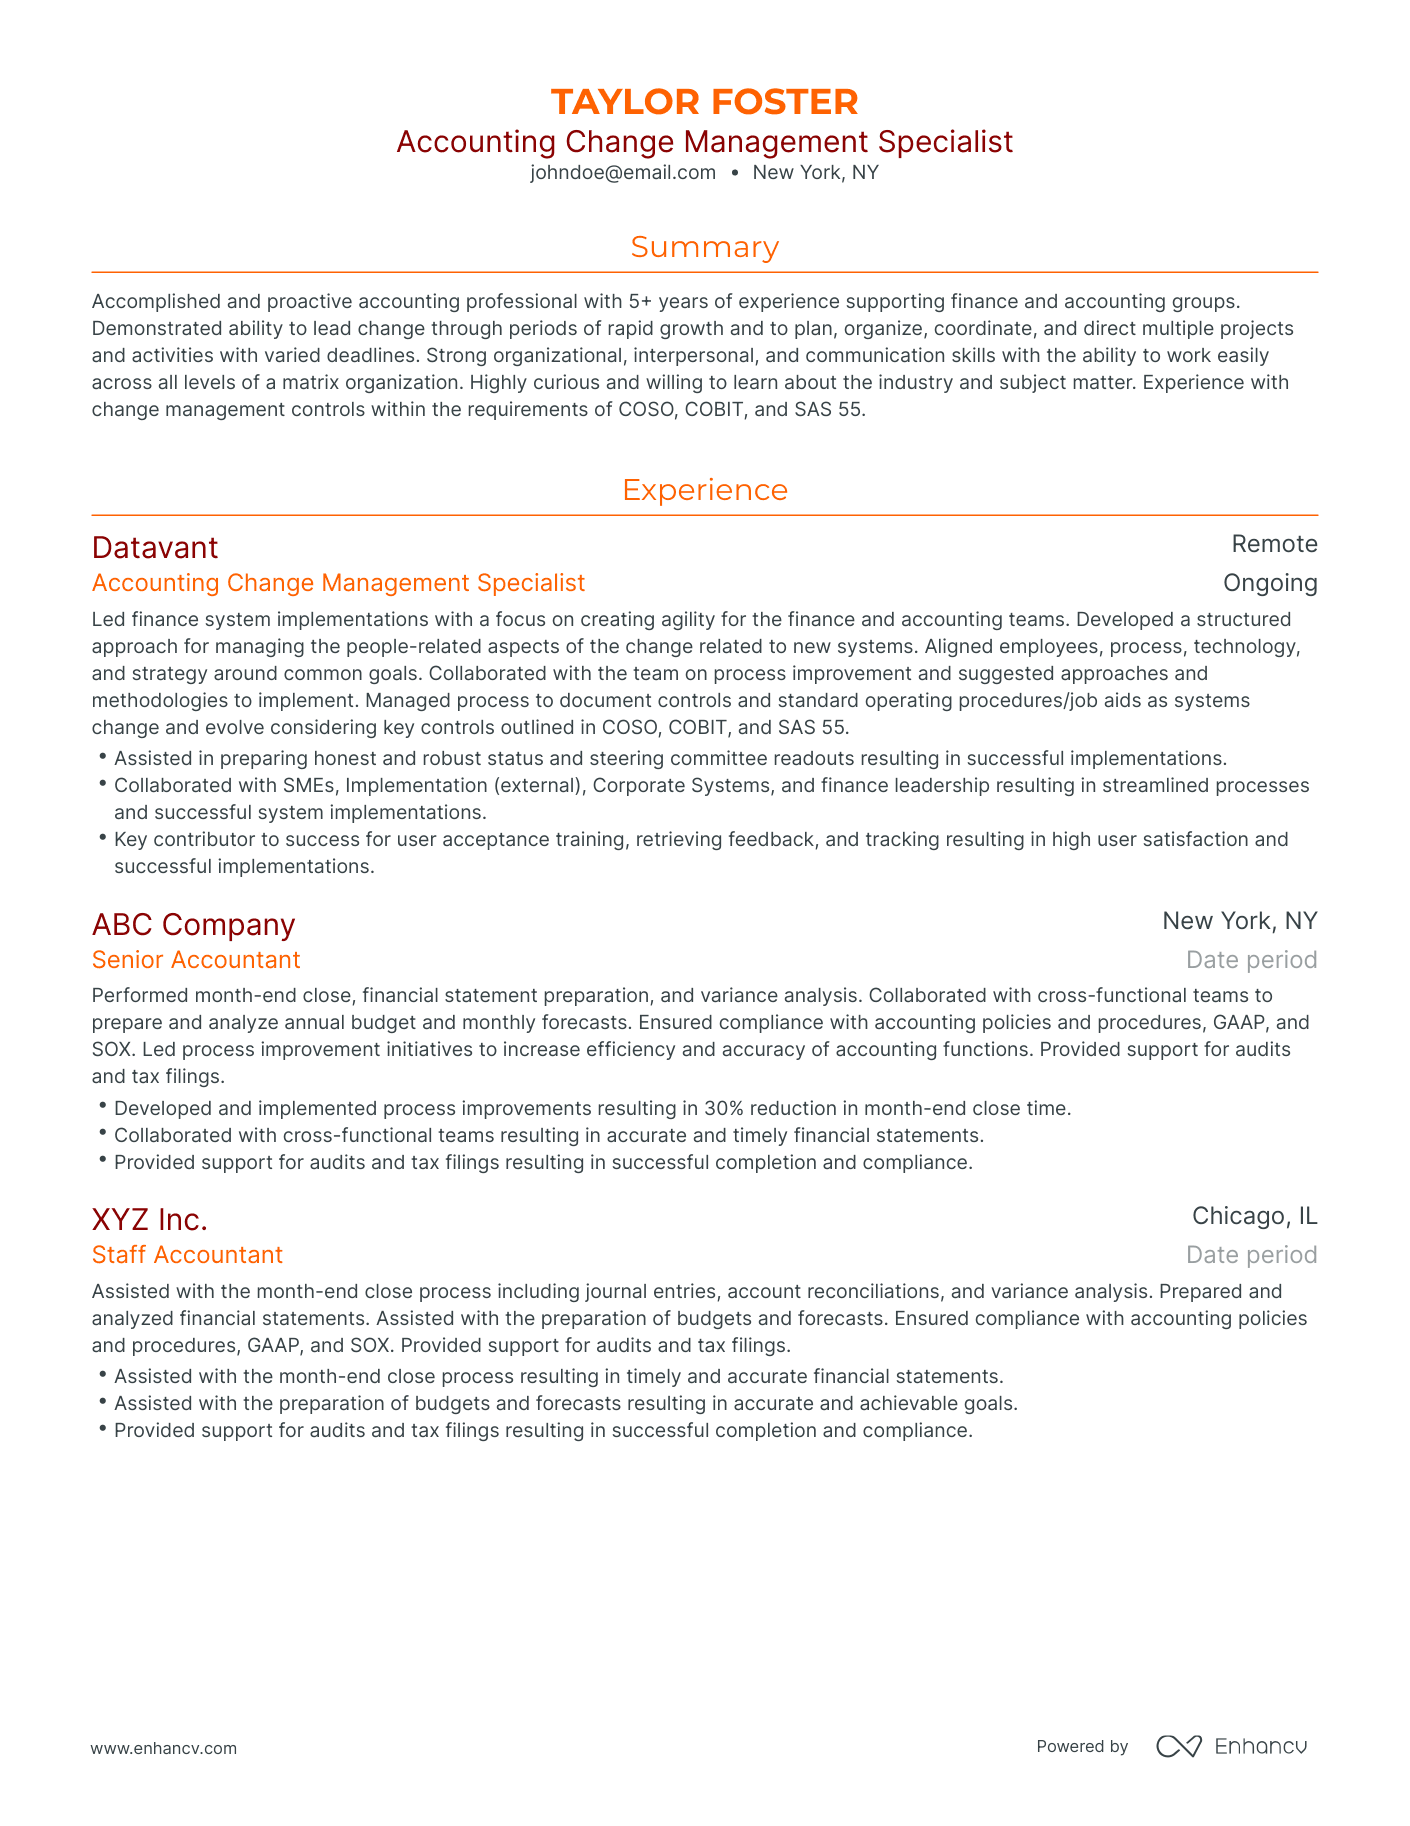 Traditional Management Accounting Resume Template